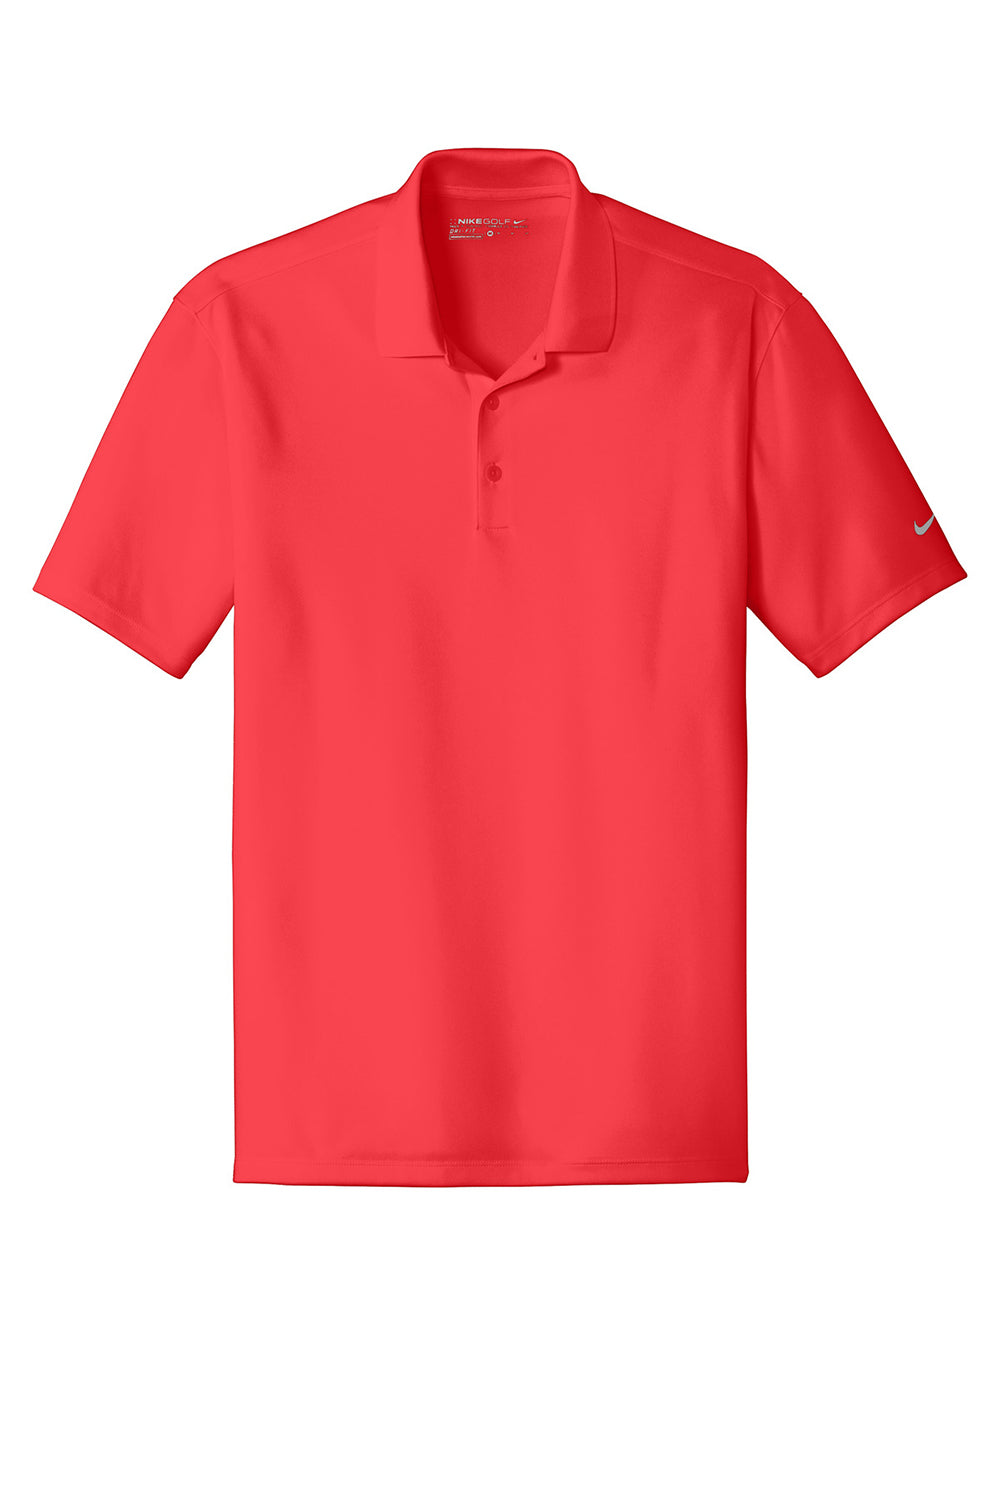 Nike 838956 Mens Players Dri-Fit Moisture Wicking Short Sleeve Polo Shirt University Red Flat Front